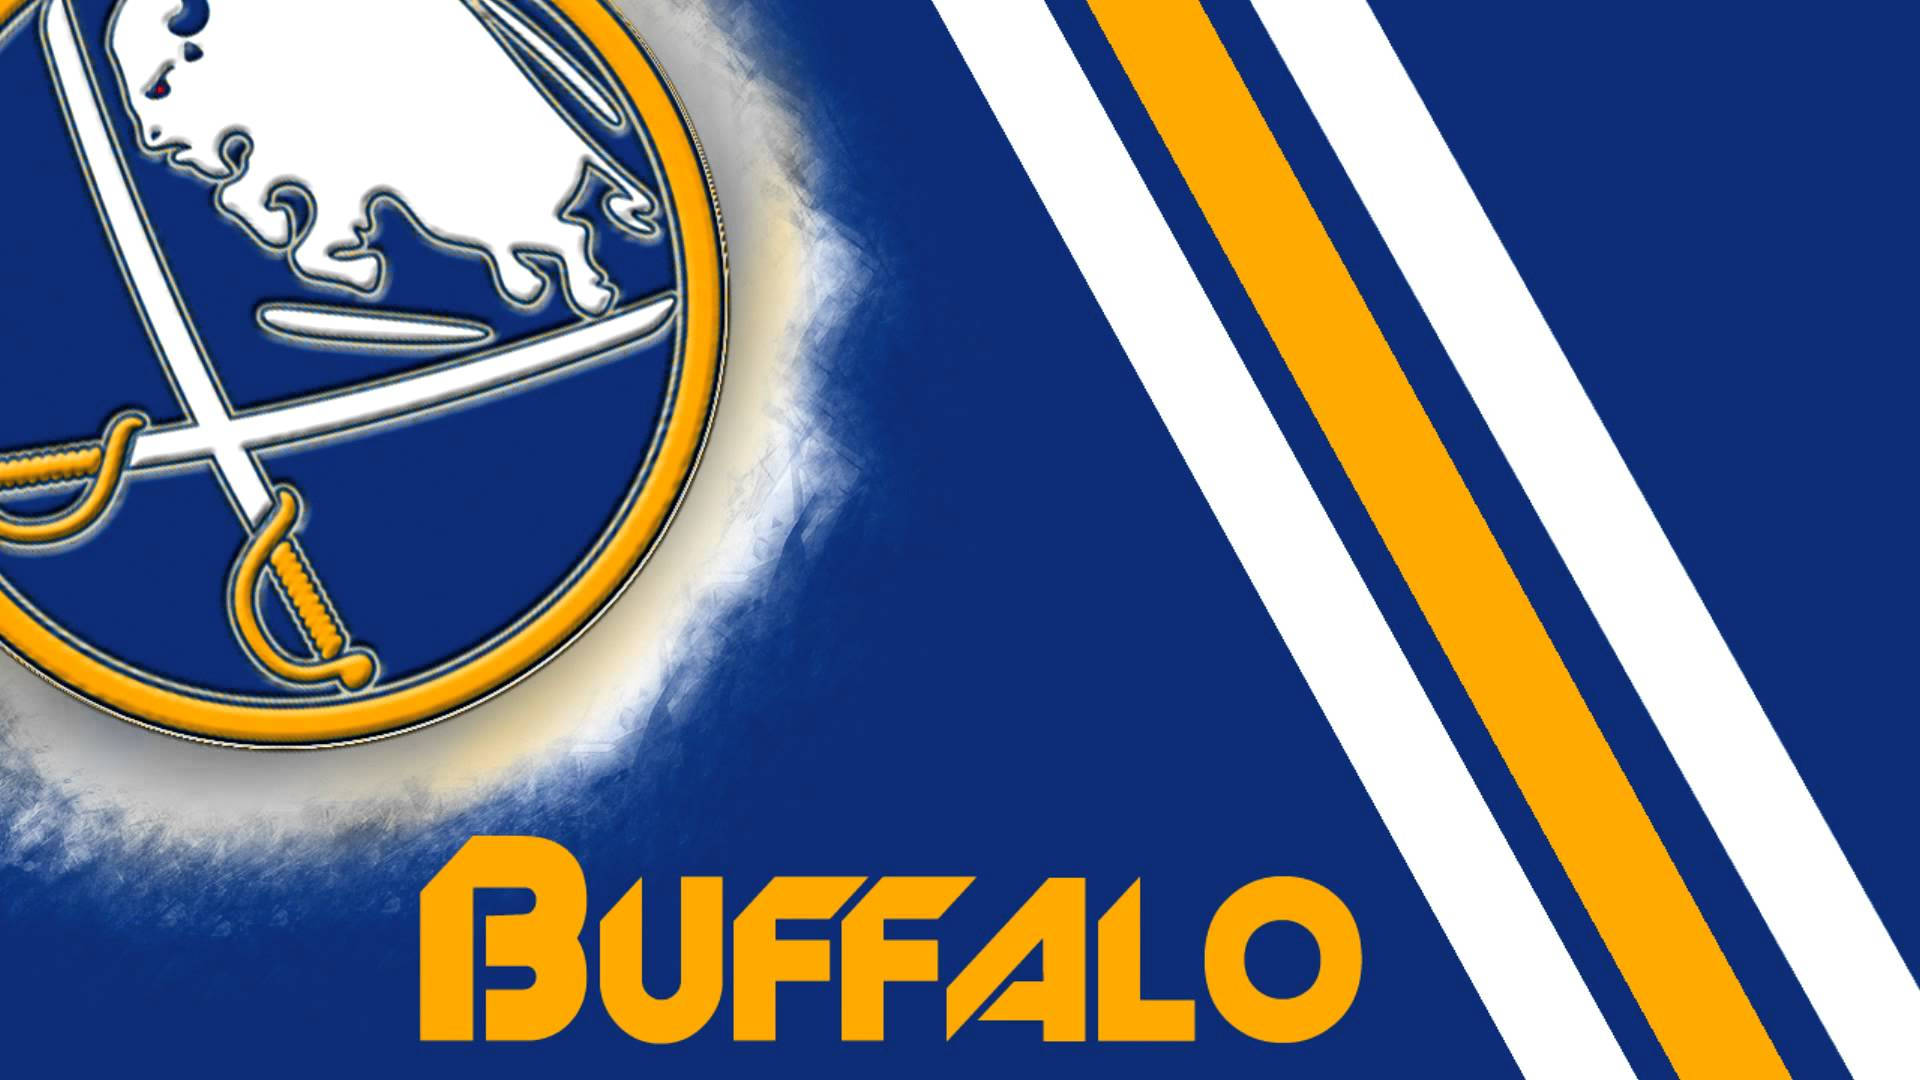 Buffalo Sabres on X: Wallpaper Wednesday black and red style